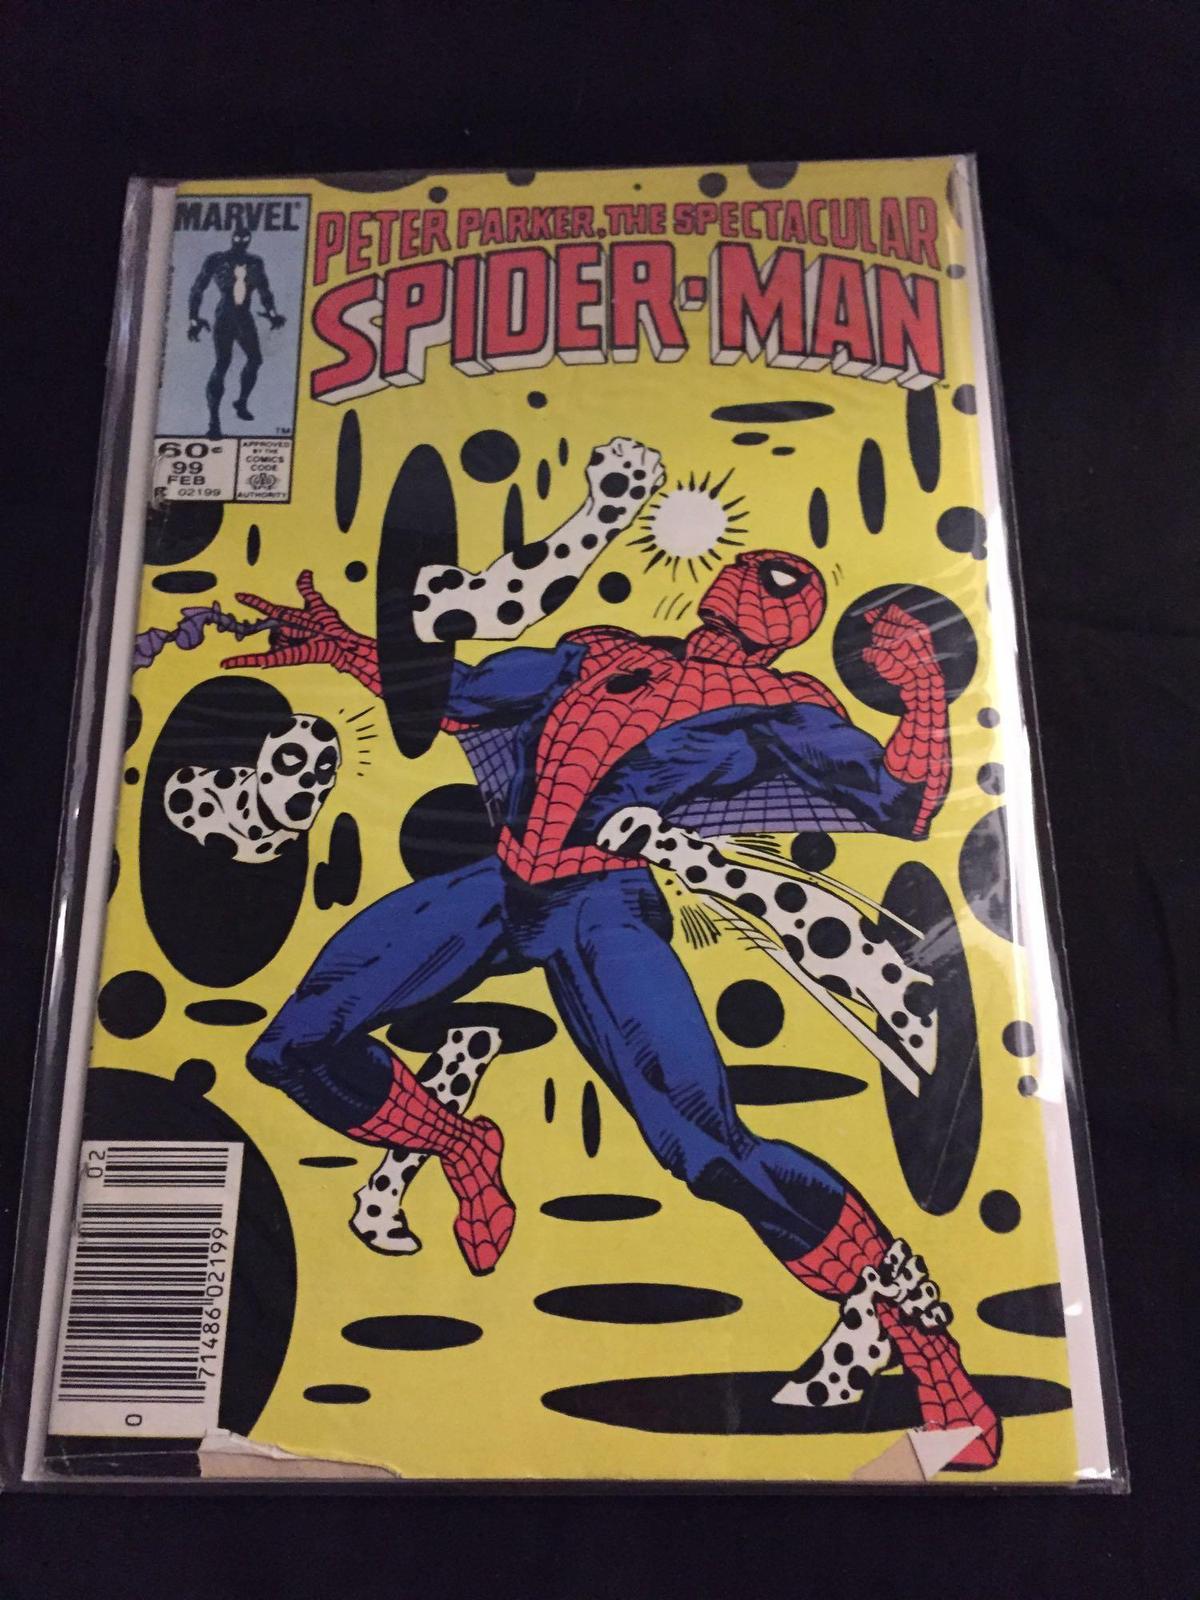 Peter Parker, The Spectacular Spider-Man #99 Comic Book from Amazing Collection B